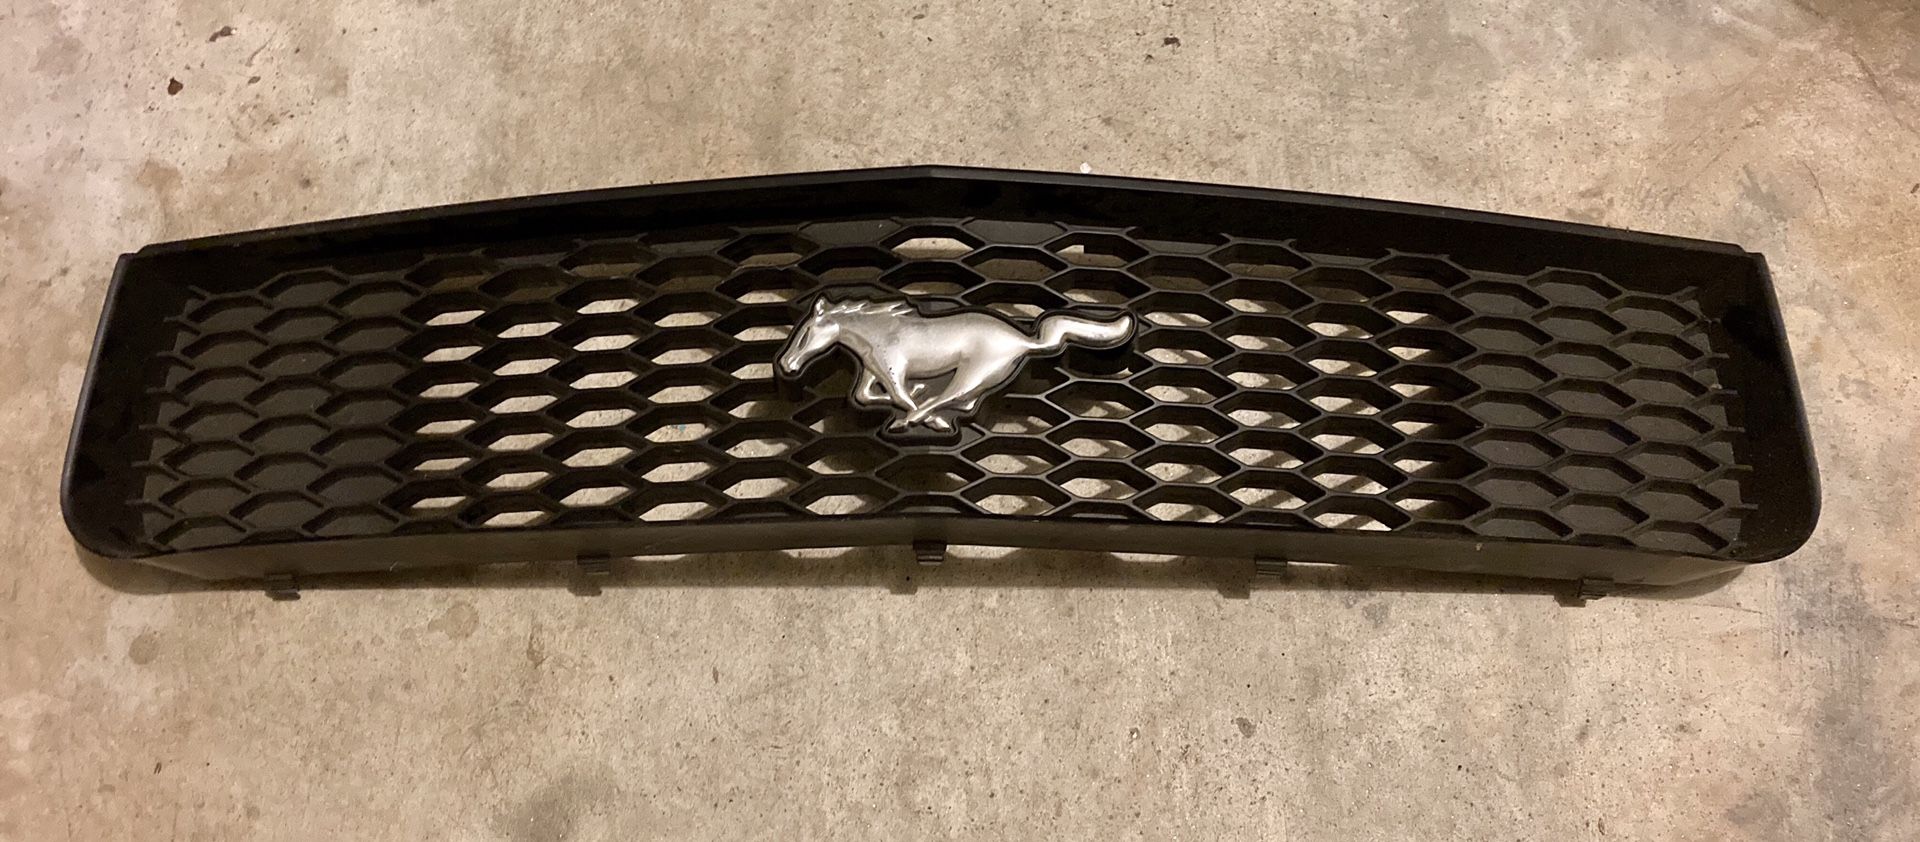 2005 Mustang Grill